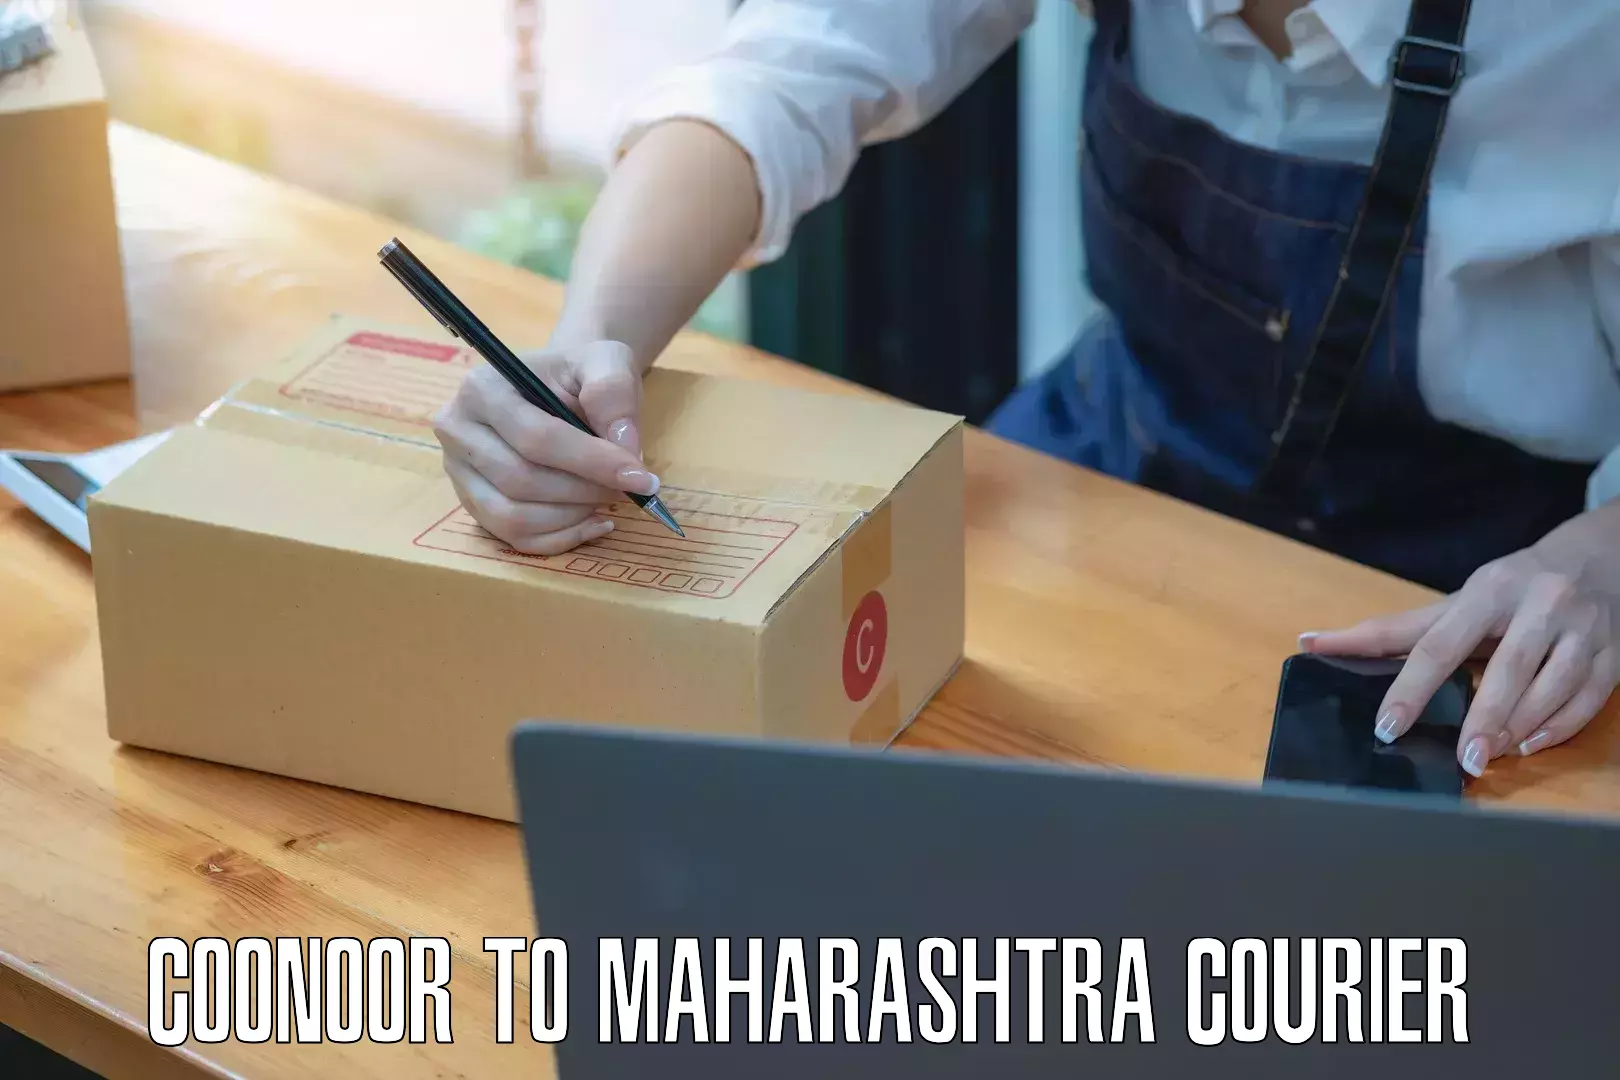 Expedited shipping methods Coonoor to Maharashtra